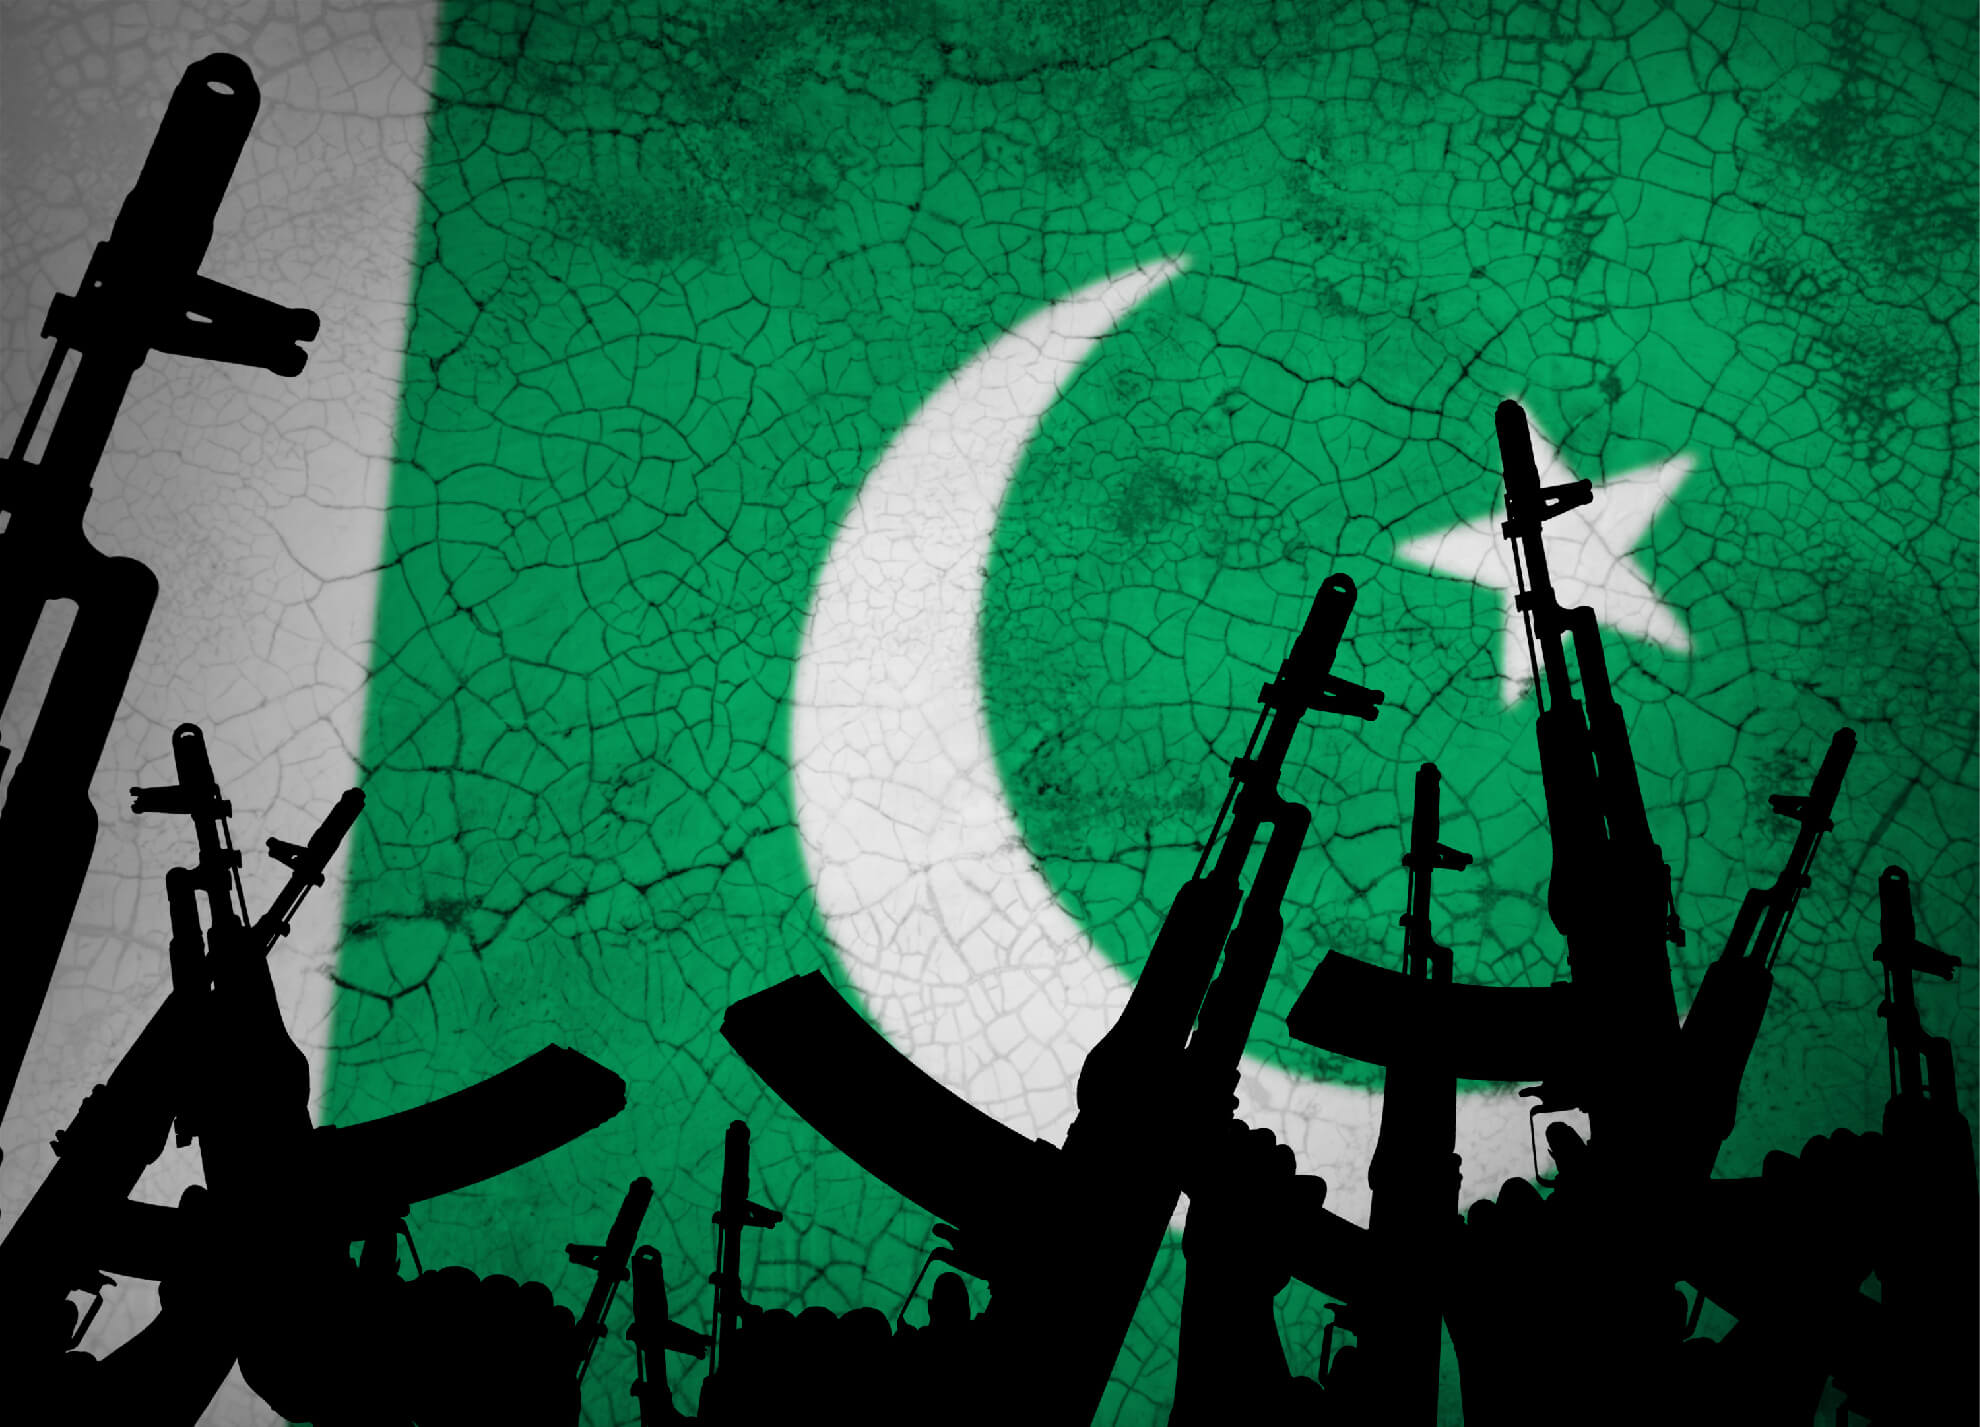 Several automatic rifles raised up on the background of the Pakistani flag